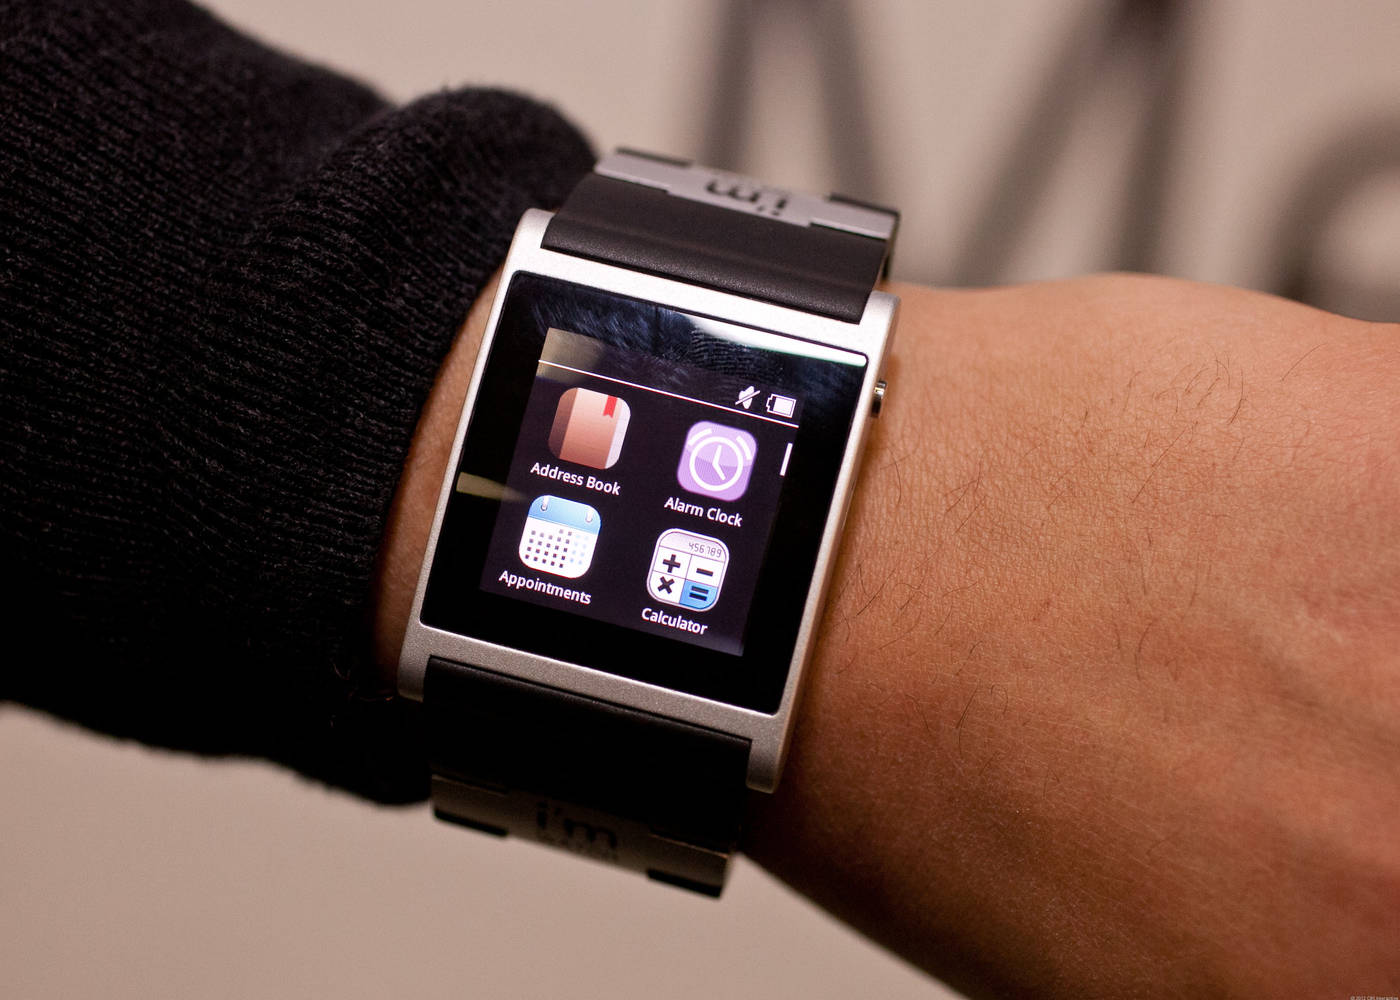 Samsung Galaxy Gear specs and images - 3